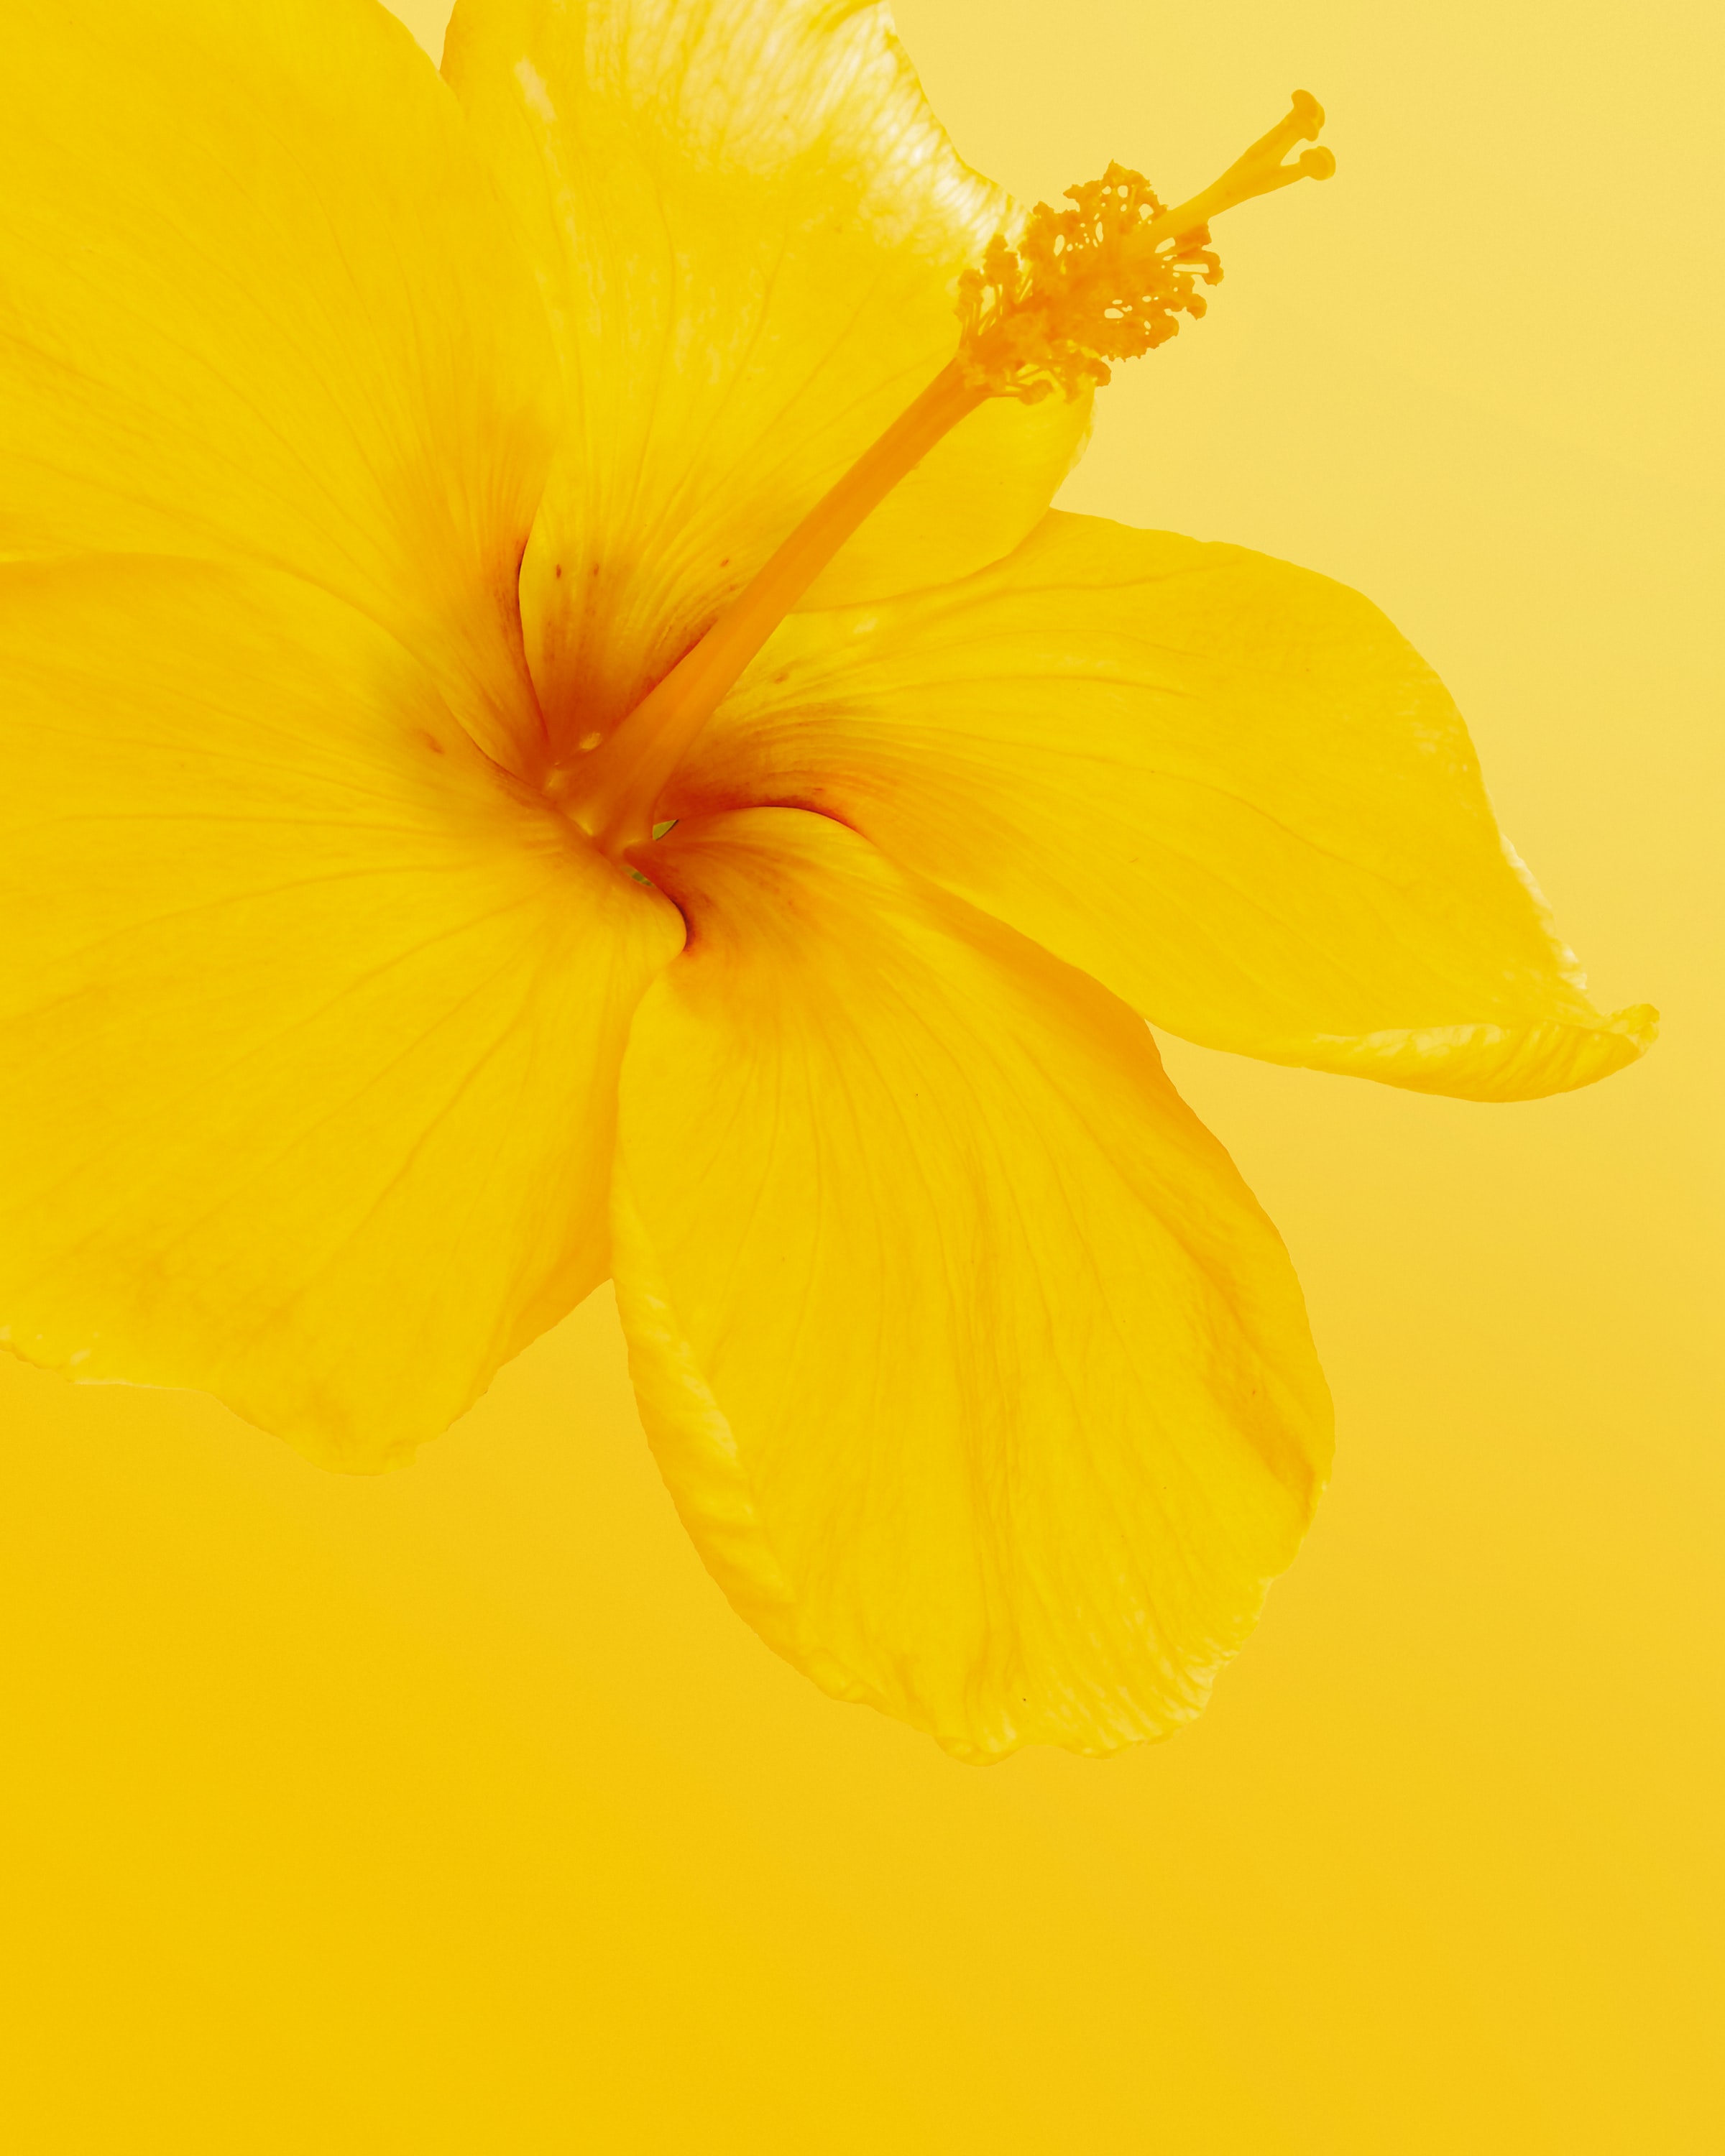 157156 free wallpaper 2160x3840 for phone, download images bloom, flower, flowers, hibiscus 2160x3840 for mobile